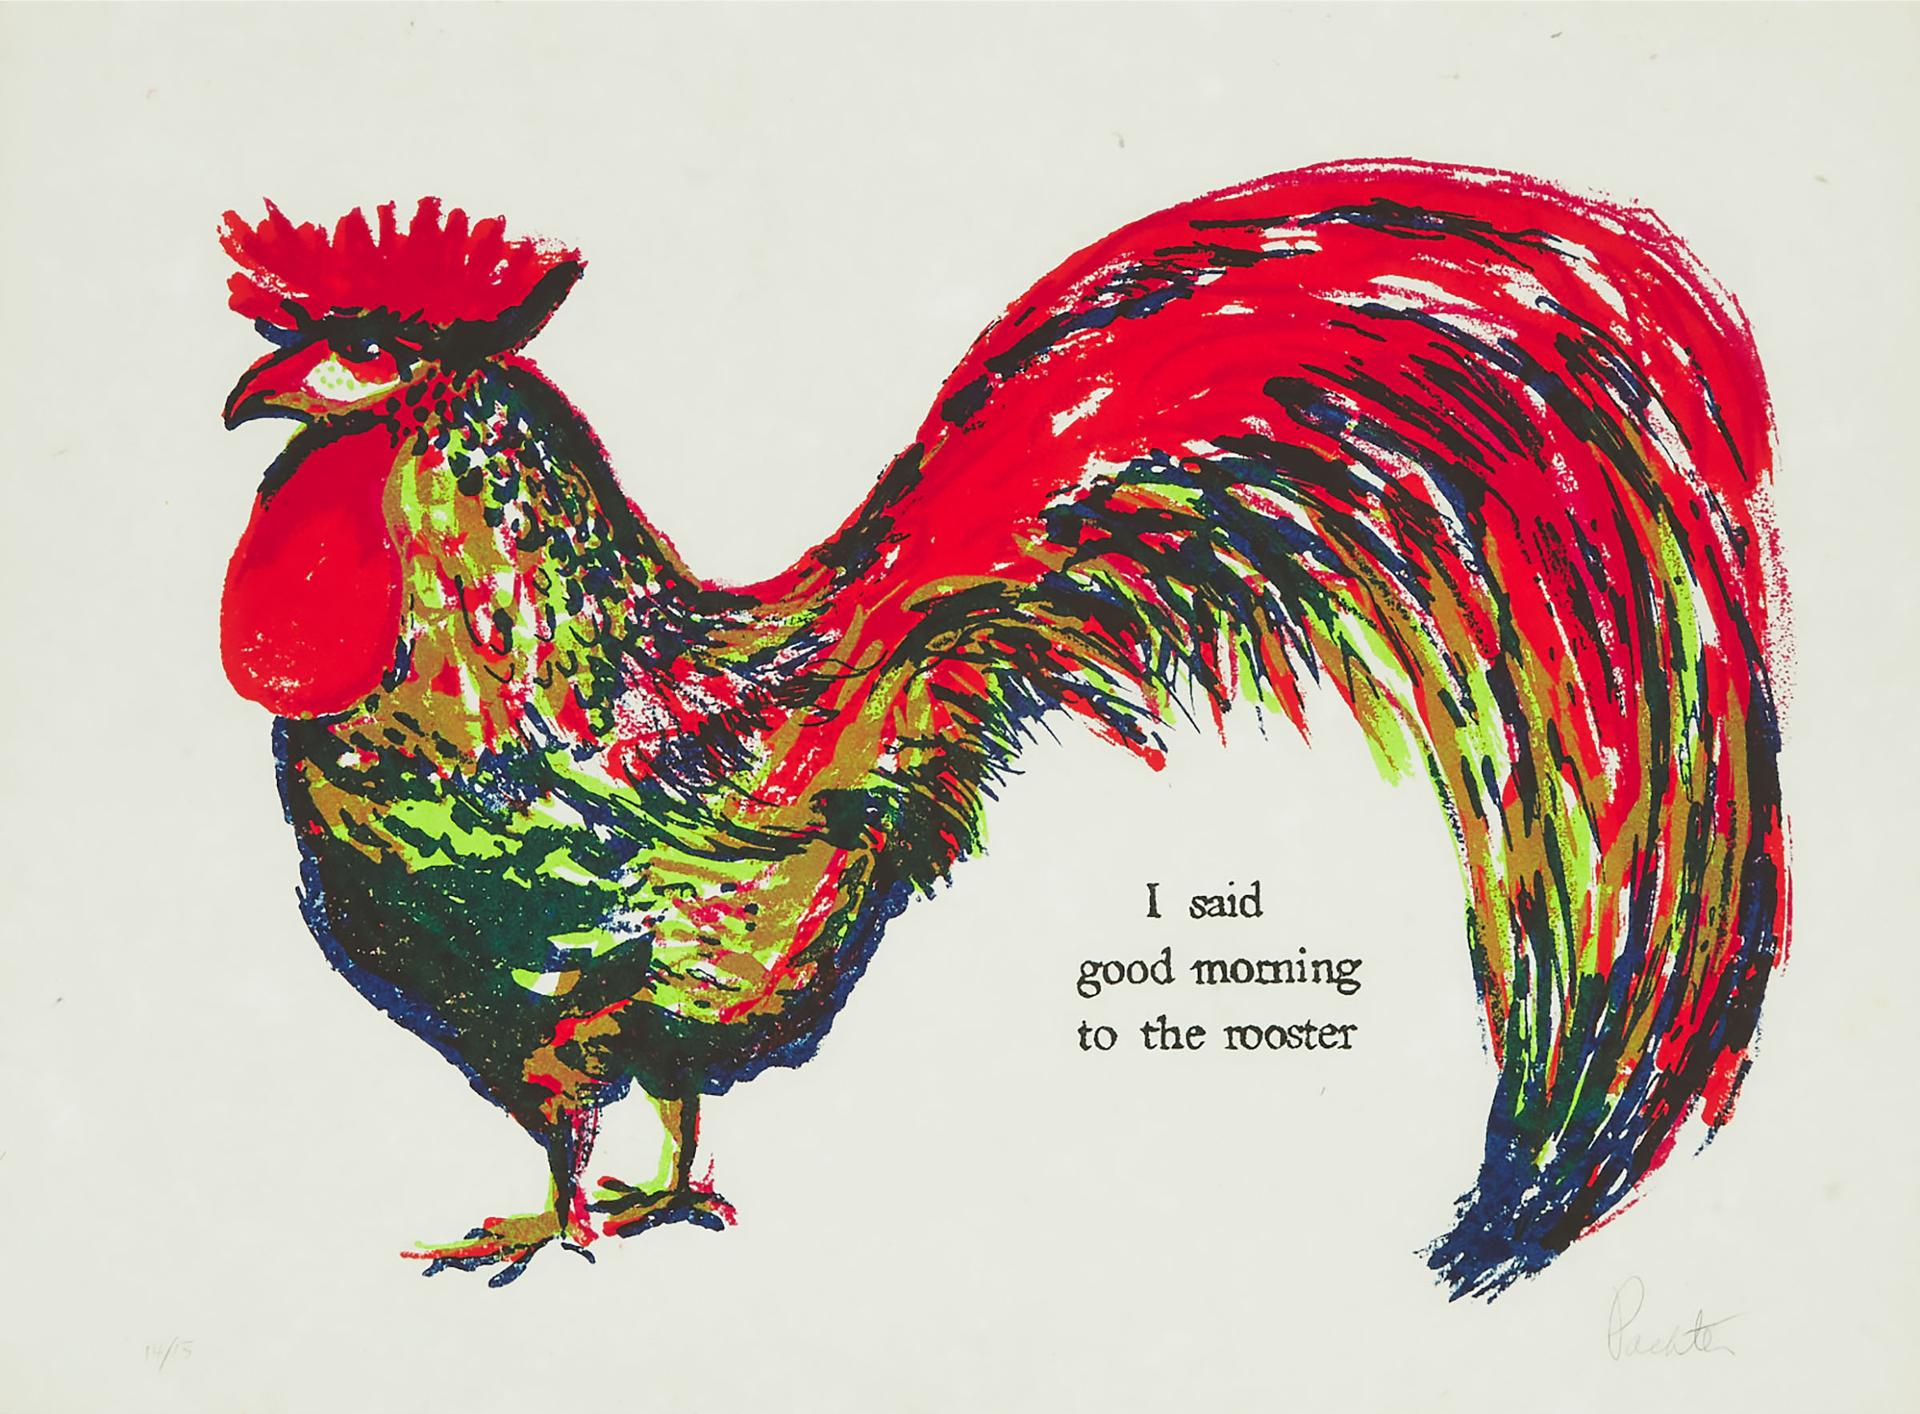 Charles Pachter (1942) - I Said Good Morning To The Rooster, 1965